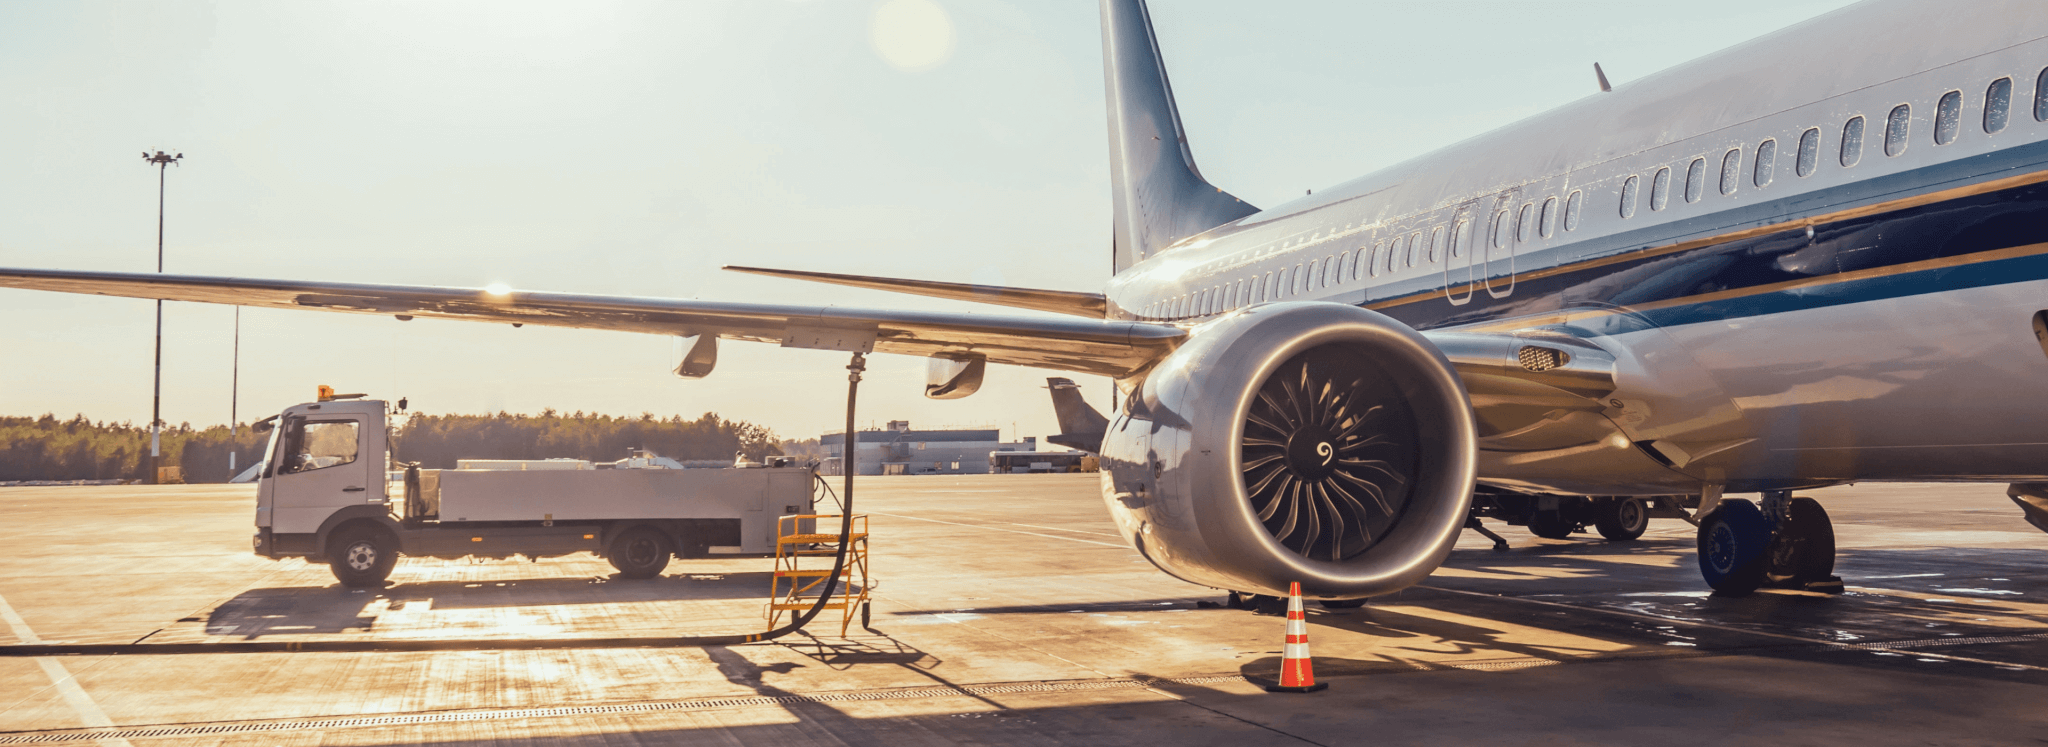 Sustainable fuels can help chart a course to net-zero aviation emissions